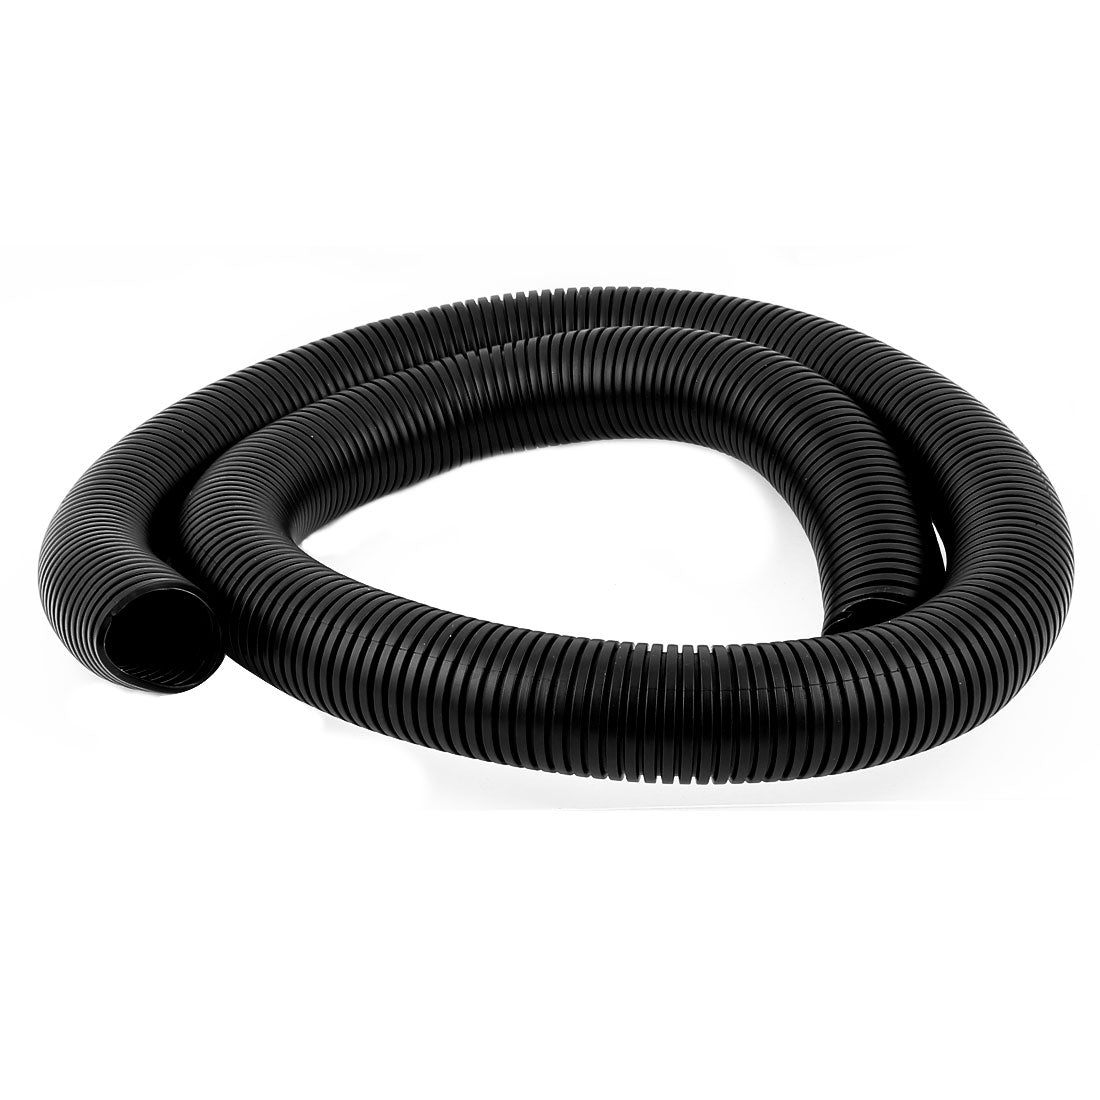 uxcell Uxcell 1.45 M 35 x 42 mm Nylon Flexible Corrugated Conduit Tube for Garden,Office Black